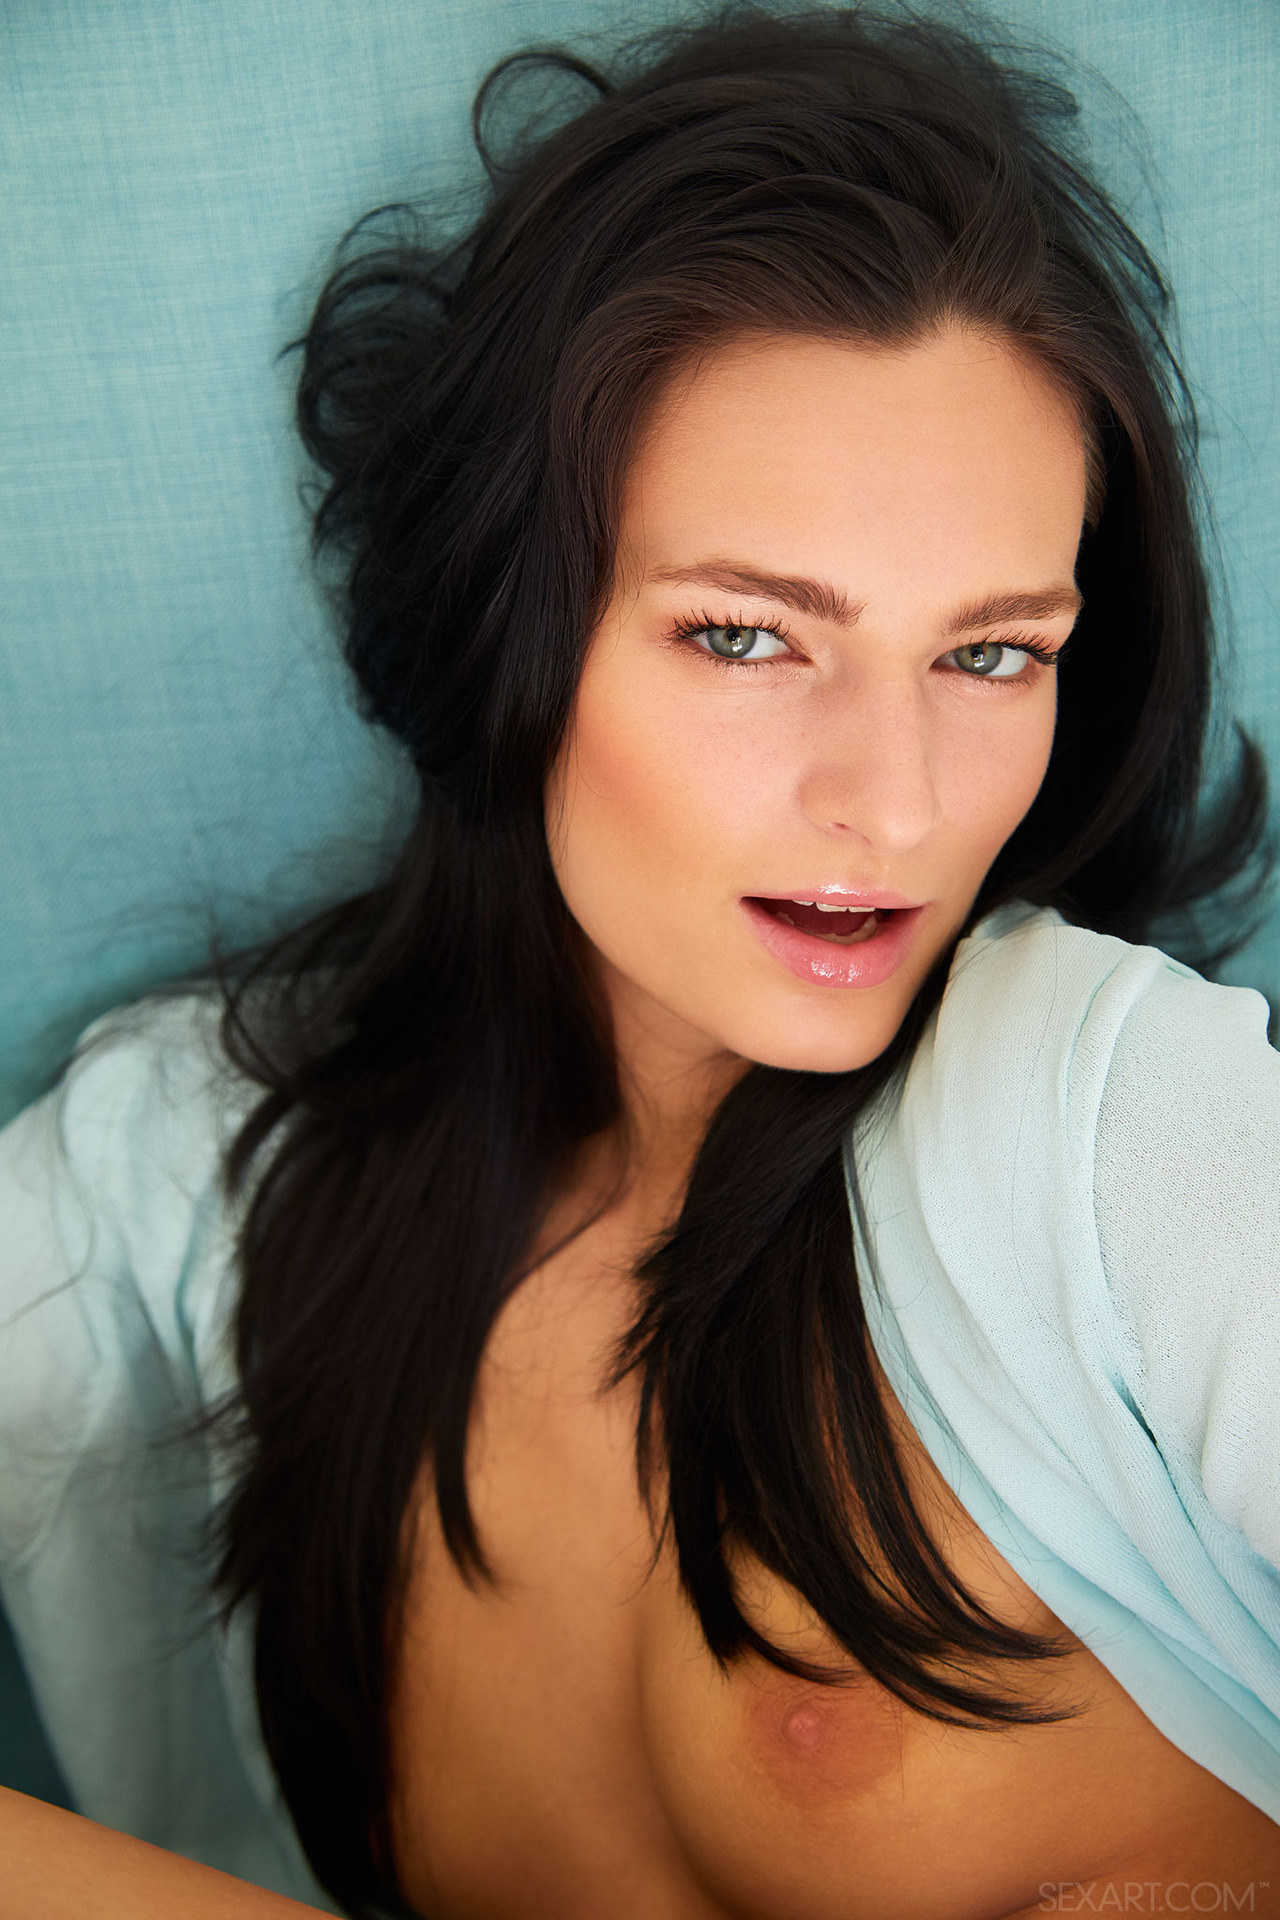 Gorgeous Lee Anne lets her turquoise shirt fall open to reveal her bare, golden-tanned skin 05